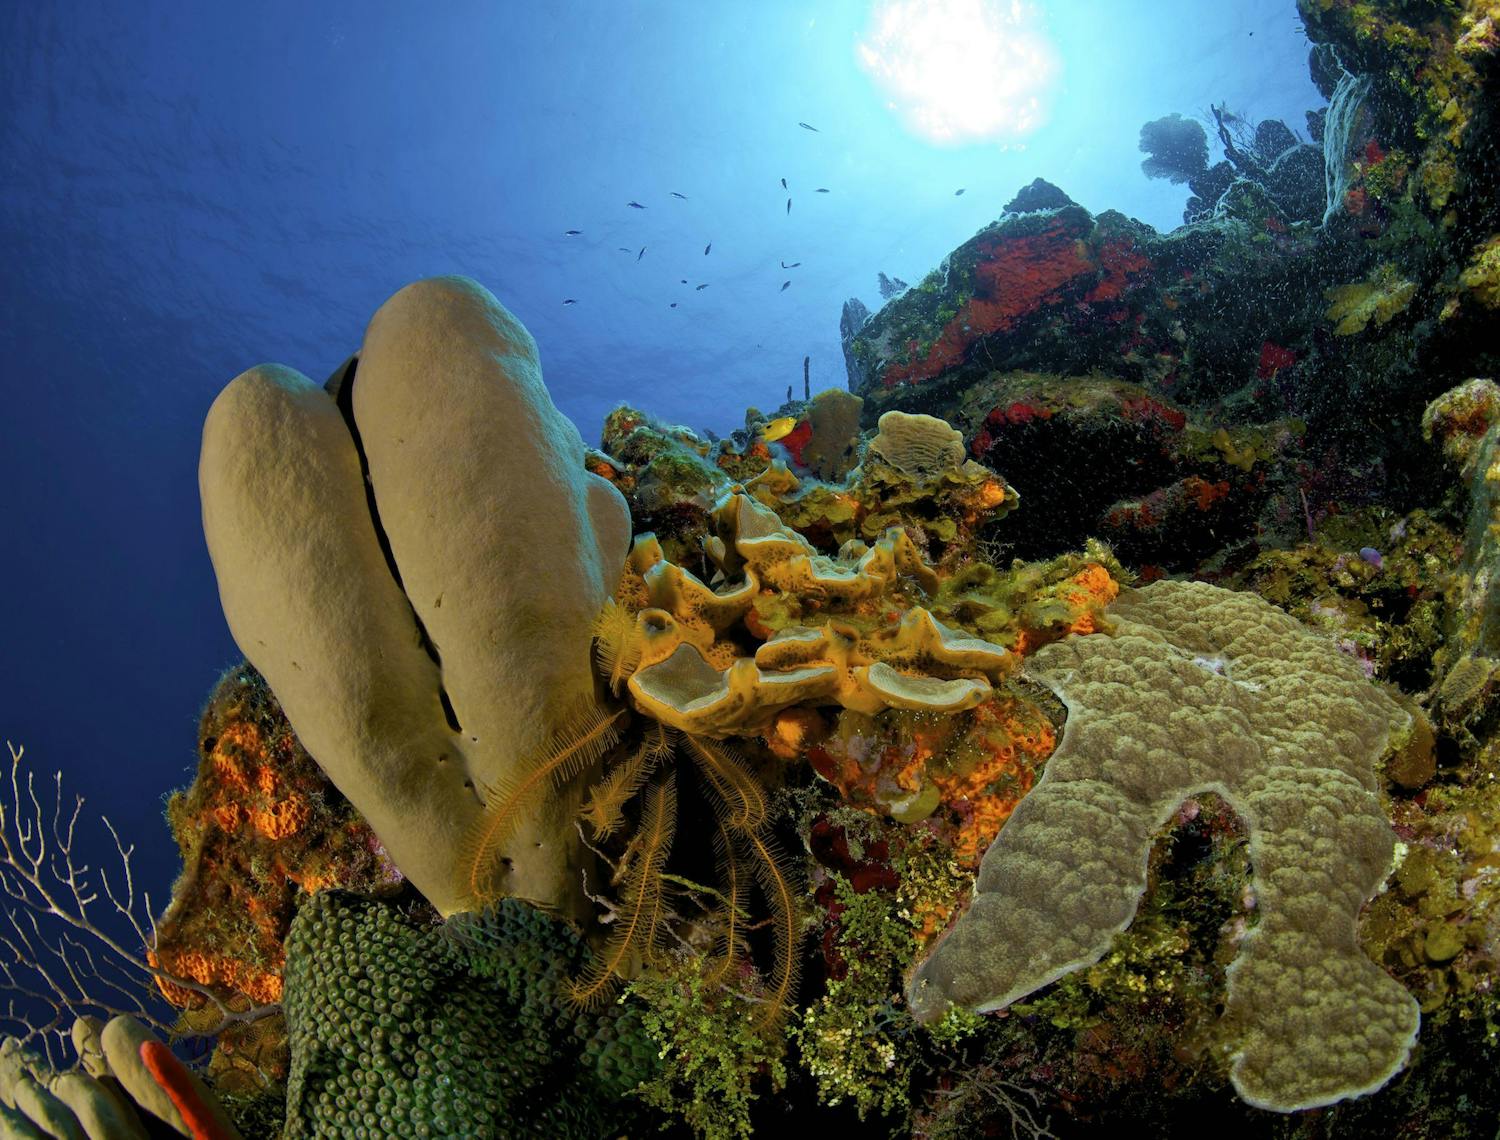 Underwater coral with fish off in the distance and light coming from above